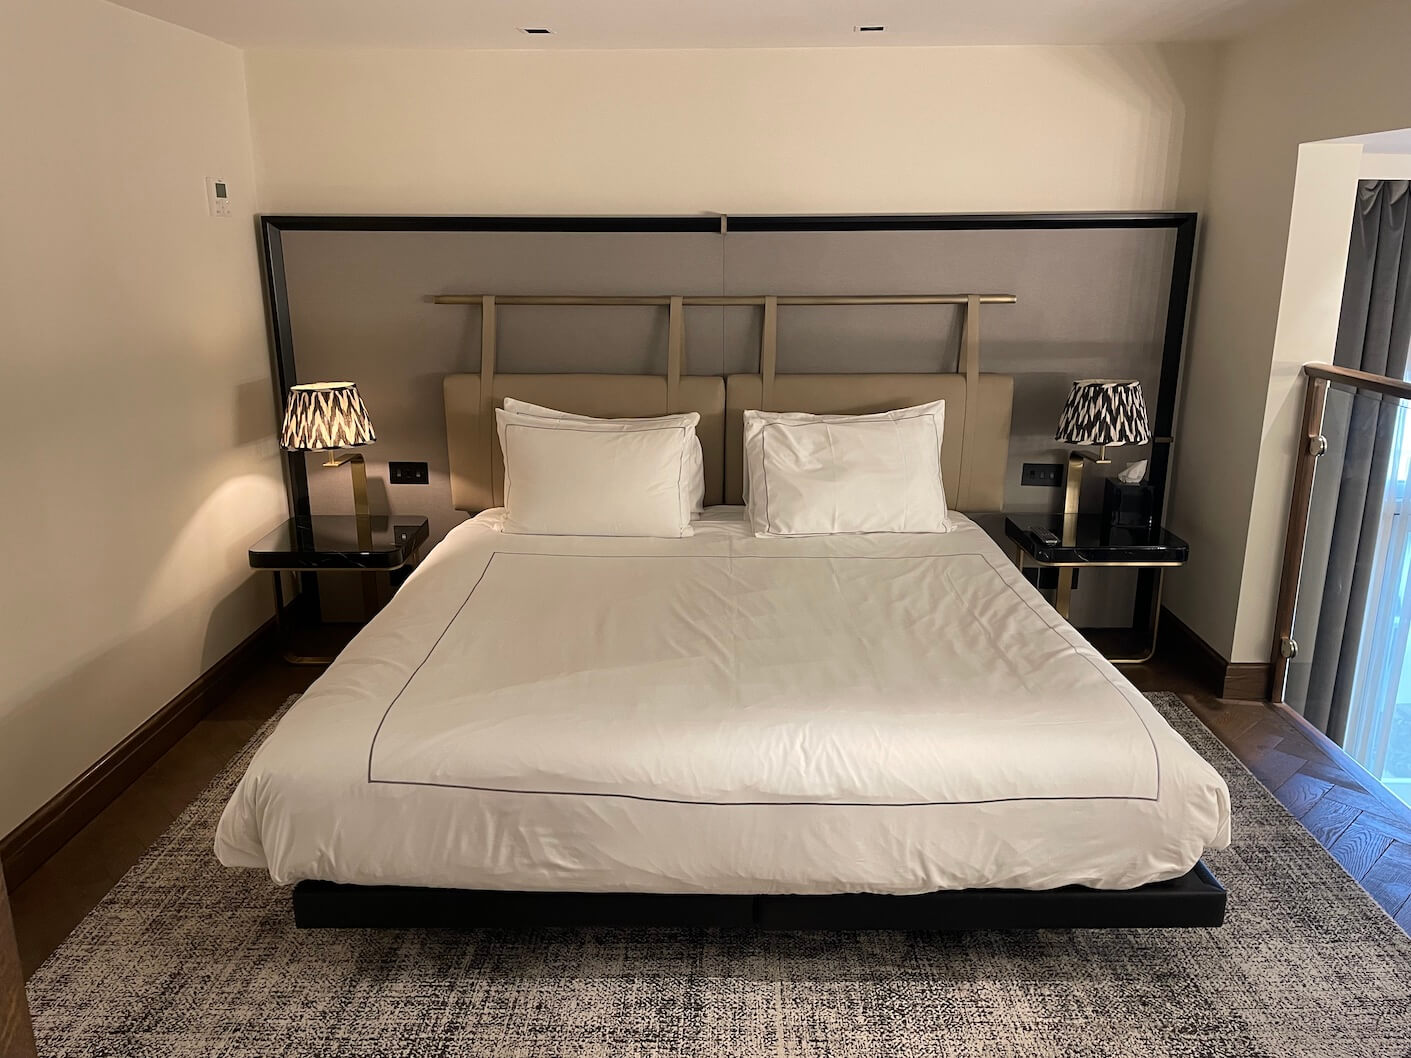 the King-sized bed in the Loft bedroom at Holmes Hotel London